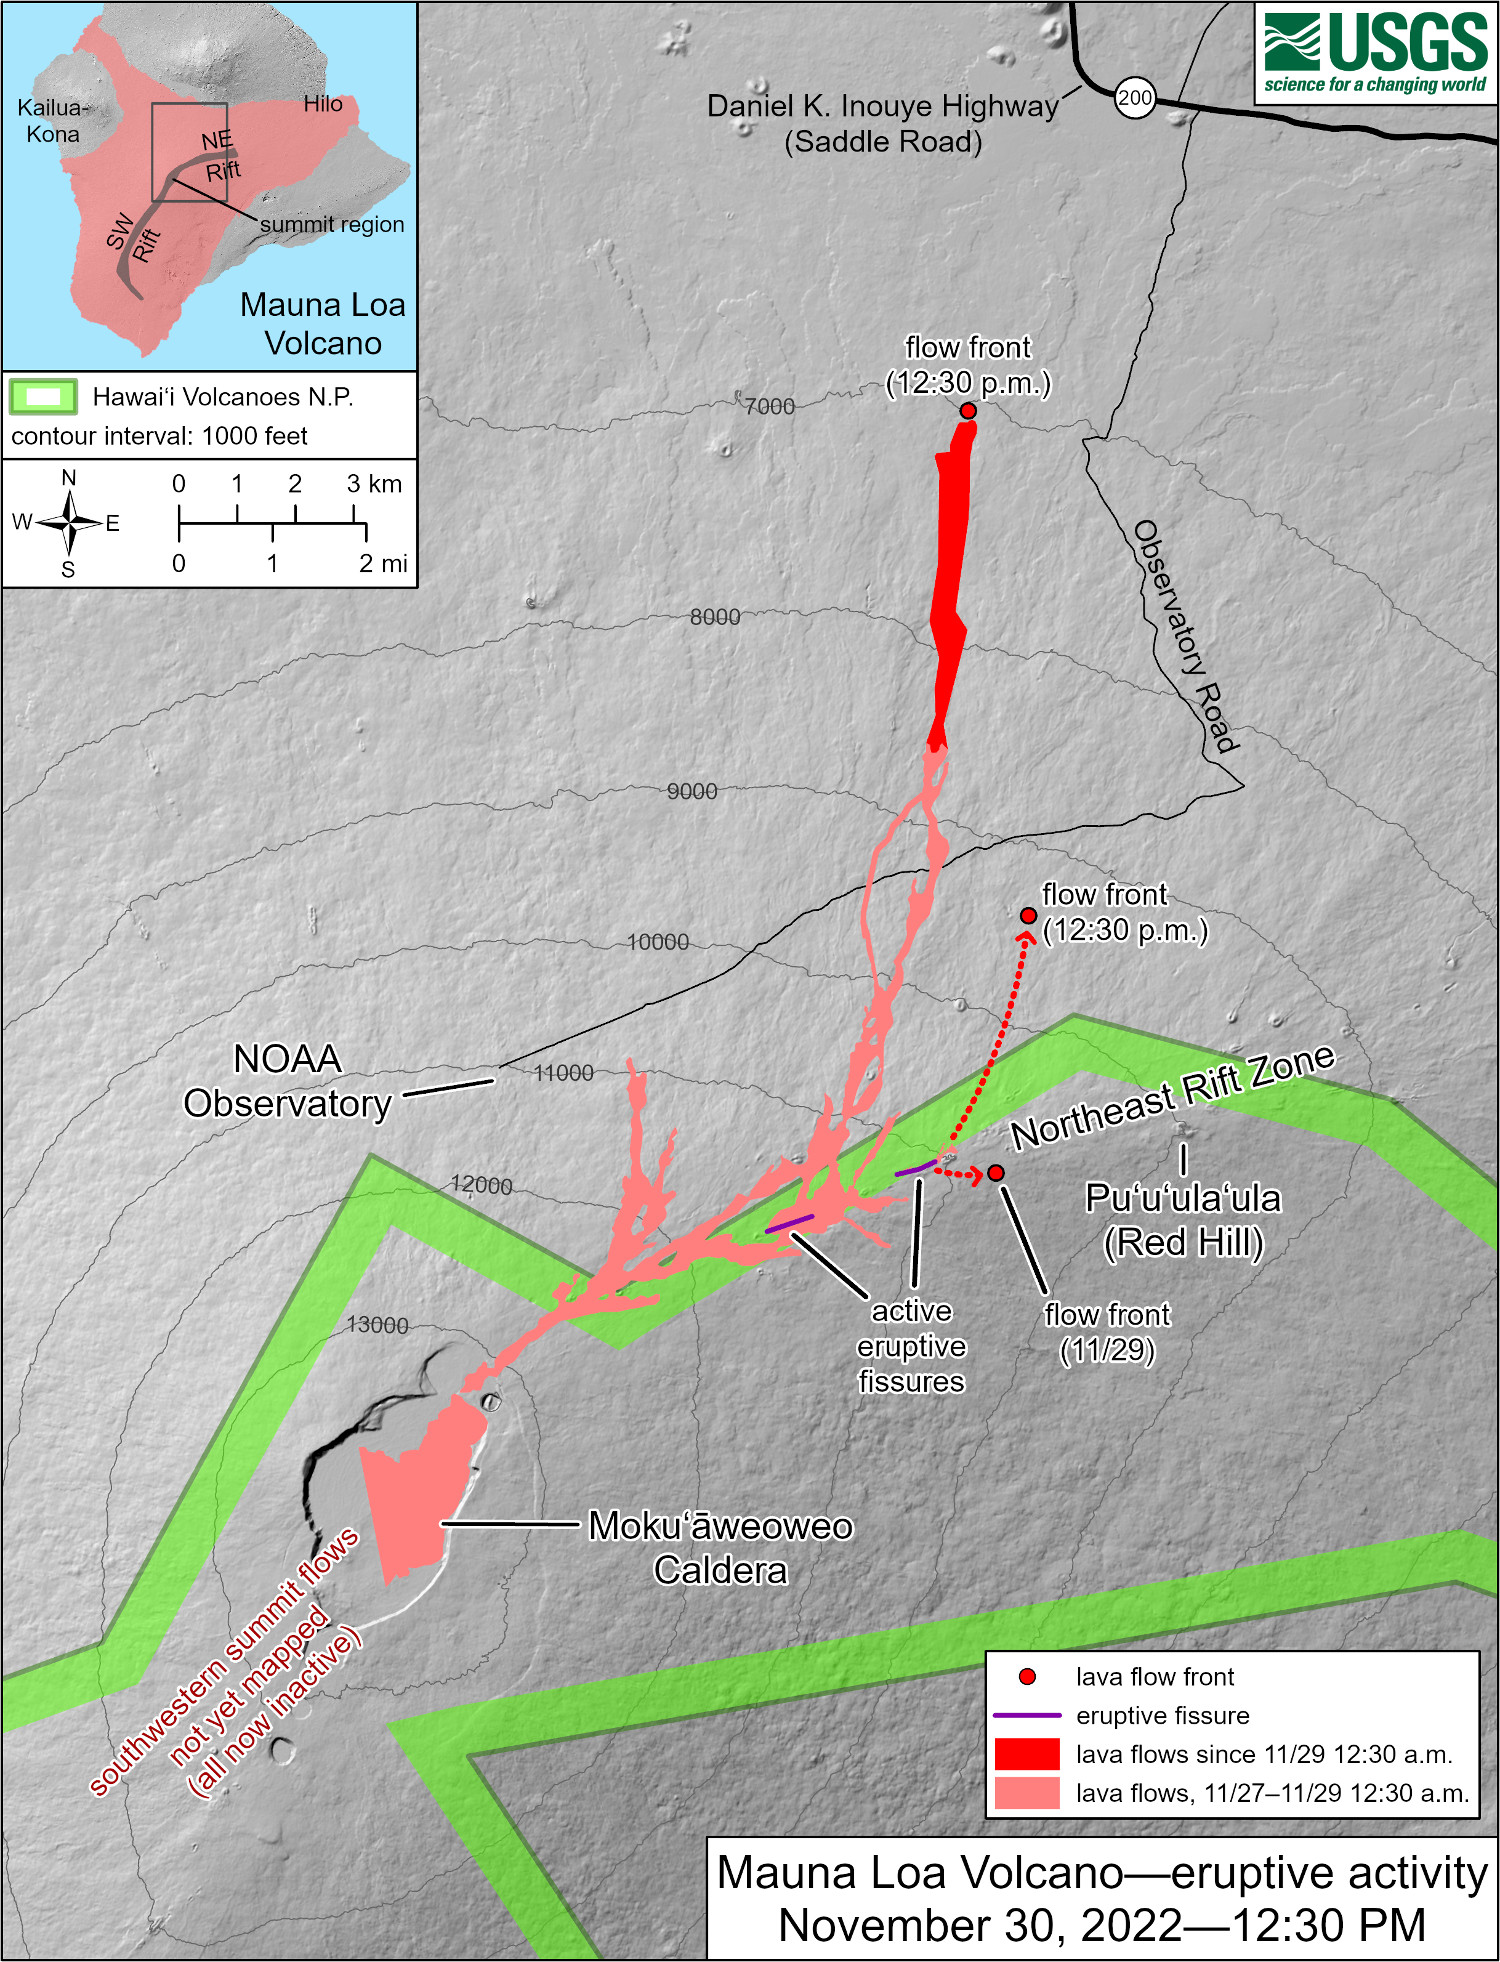 USGS: "The Northeast Rift Zone eruption of Mauna Loa has continued into its third full day. At this time two fissures are active, sending lava flows primarily to the north-northeast. Webcam and satellite views overnight allowed USGS analysts to accurately map some of the most active flows, displayed in red here, along with older flows further uprift and in part of Mokuʻāweoweo Caldera. Elsewhere the progression of the flows is marked by dashed lines and points for the flow fronts, mapped by HVO field crews. As of 12:30 p.m. today, the most downslope flow is within 4 miles (6 kilometers) of the Daniel K. Inouye Highway (Saddle Road)."